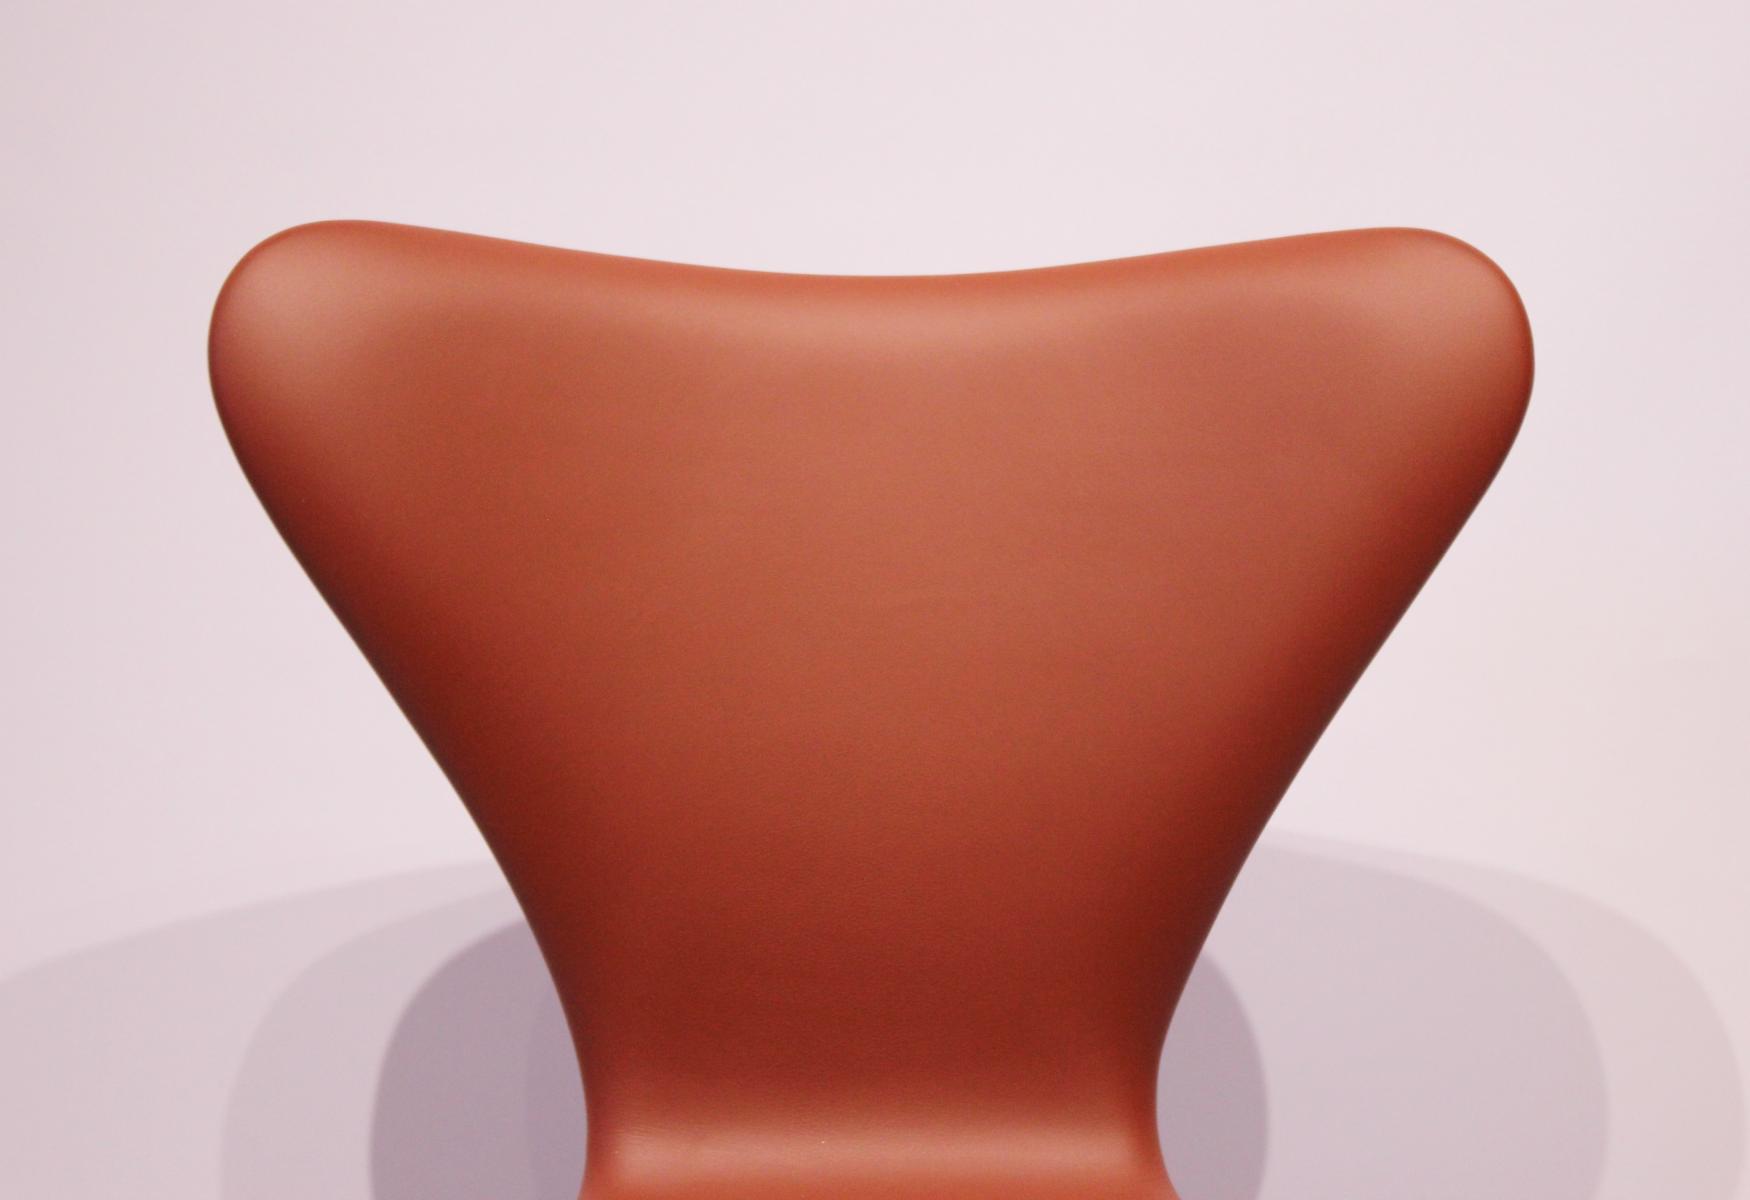 Model 3107 Cognac-Colored Savanne Leather Chairs by Arne Jacobsen ...